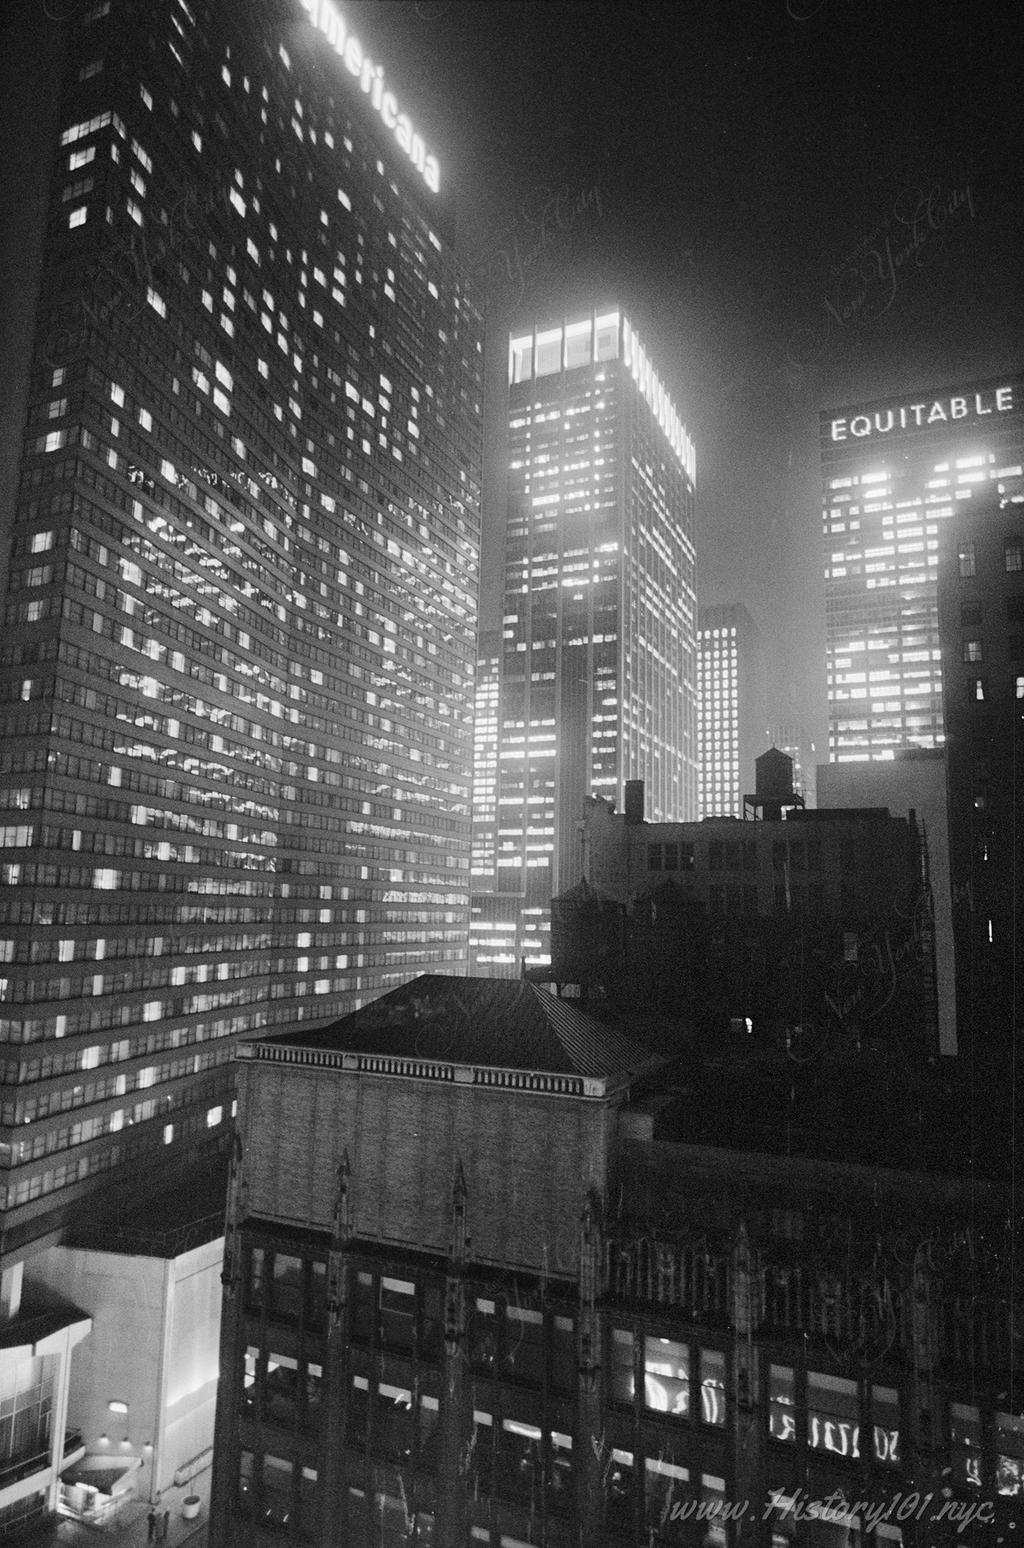 Photograph of the Equitable Building and surrounding skyscrapers and Manhattan rooftops illuminated at night.